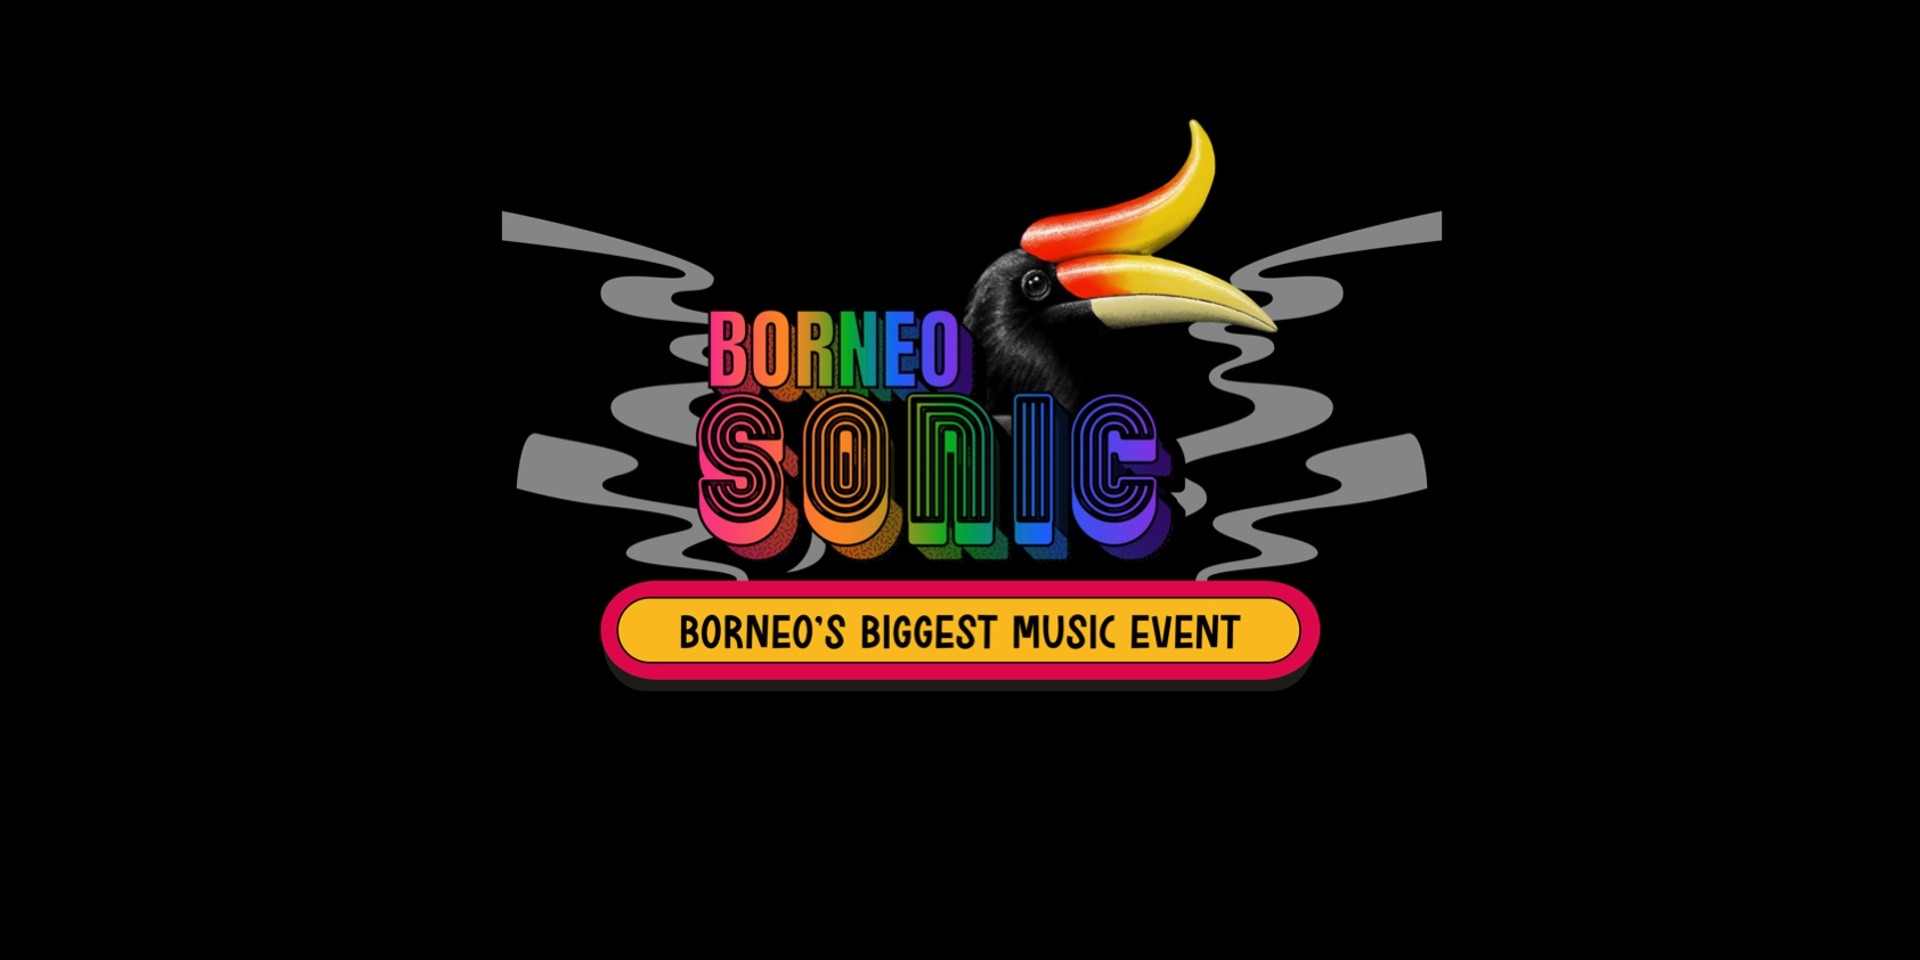 Here's what you need to know about Borneo Sonic 2023 